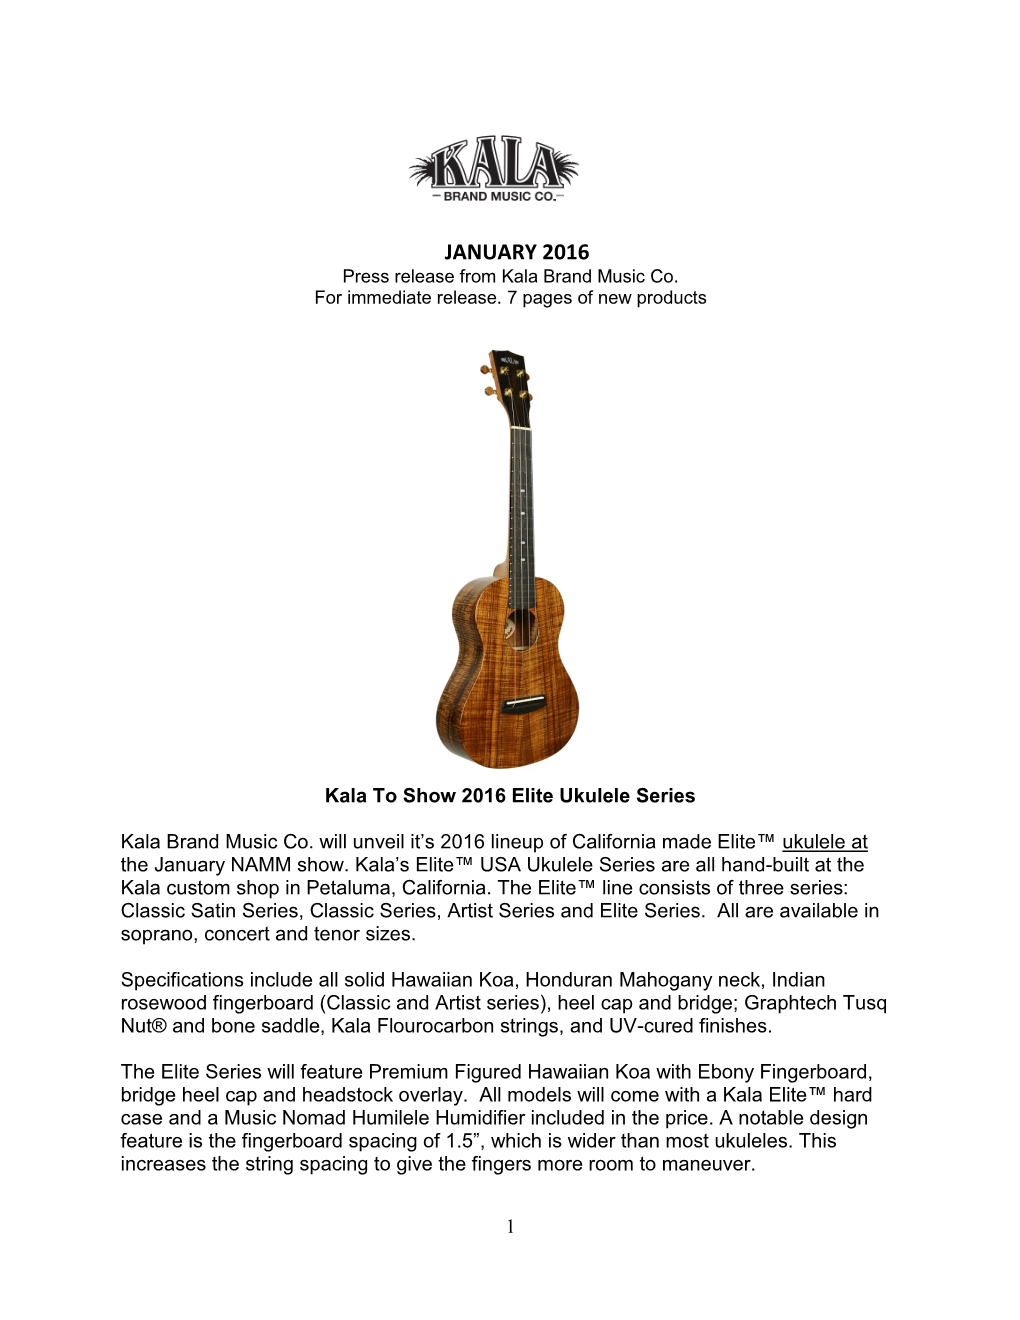 JANUARY 2016 Press Release from Kala Brand Music Co